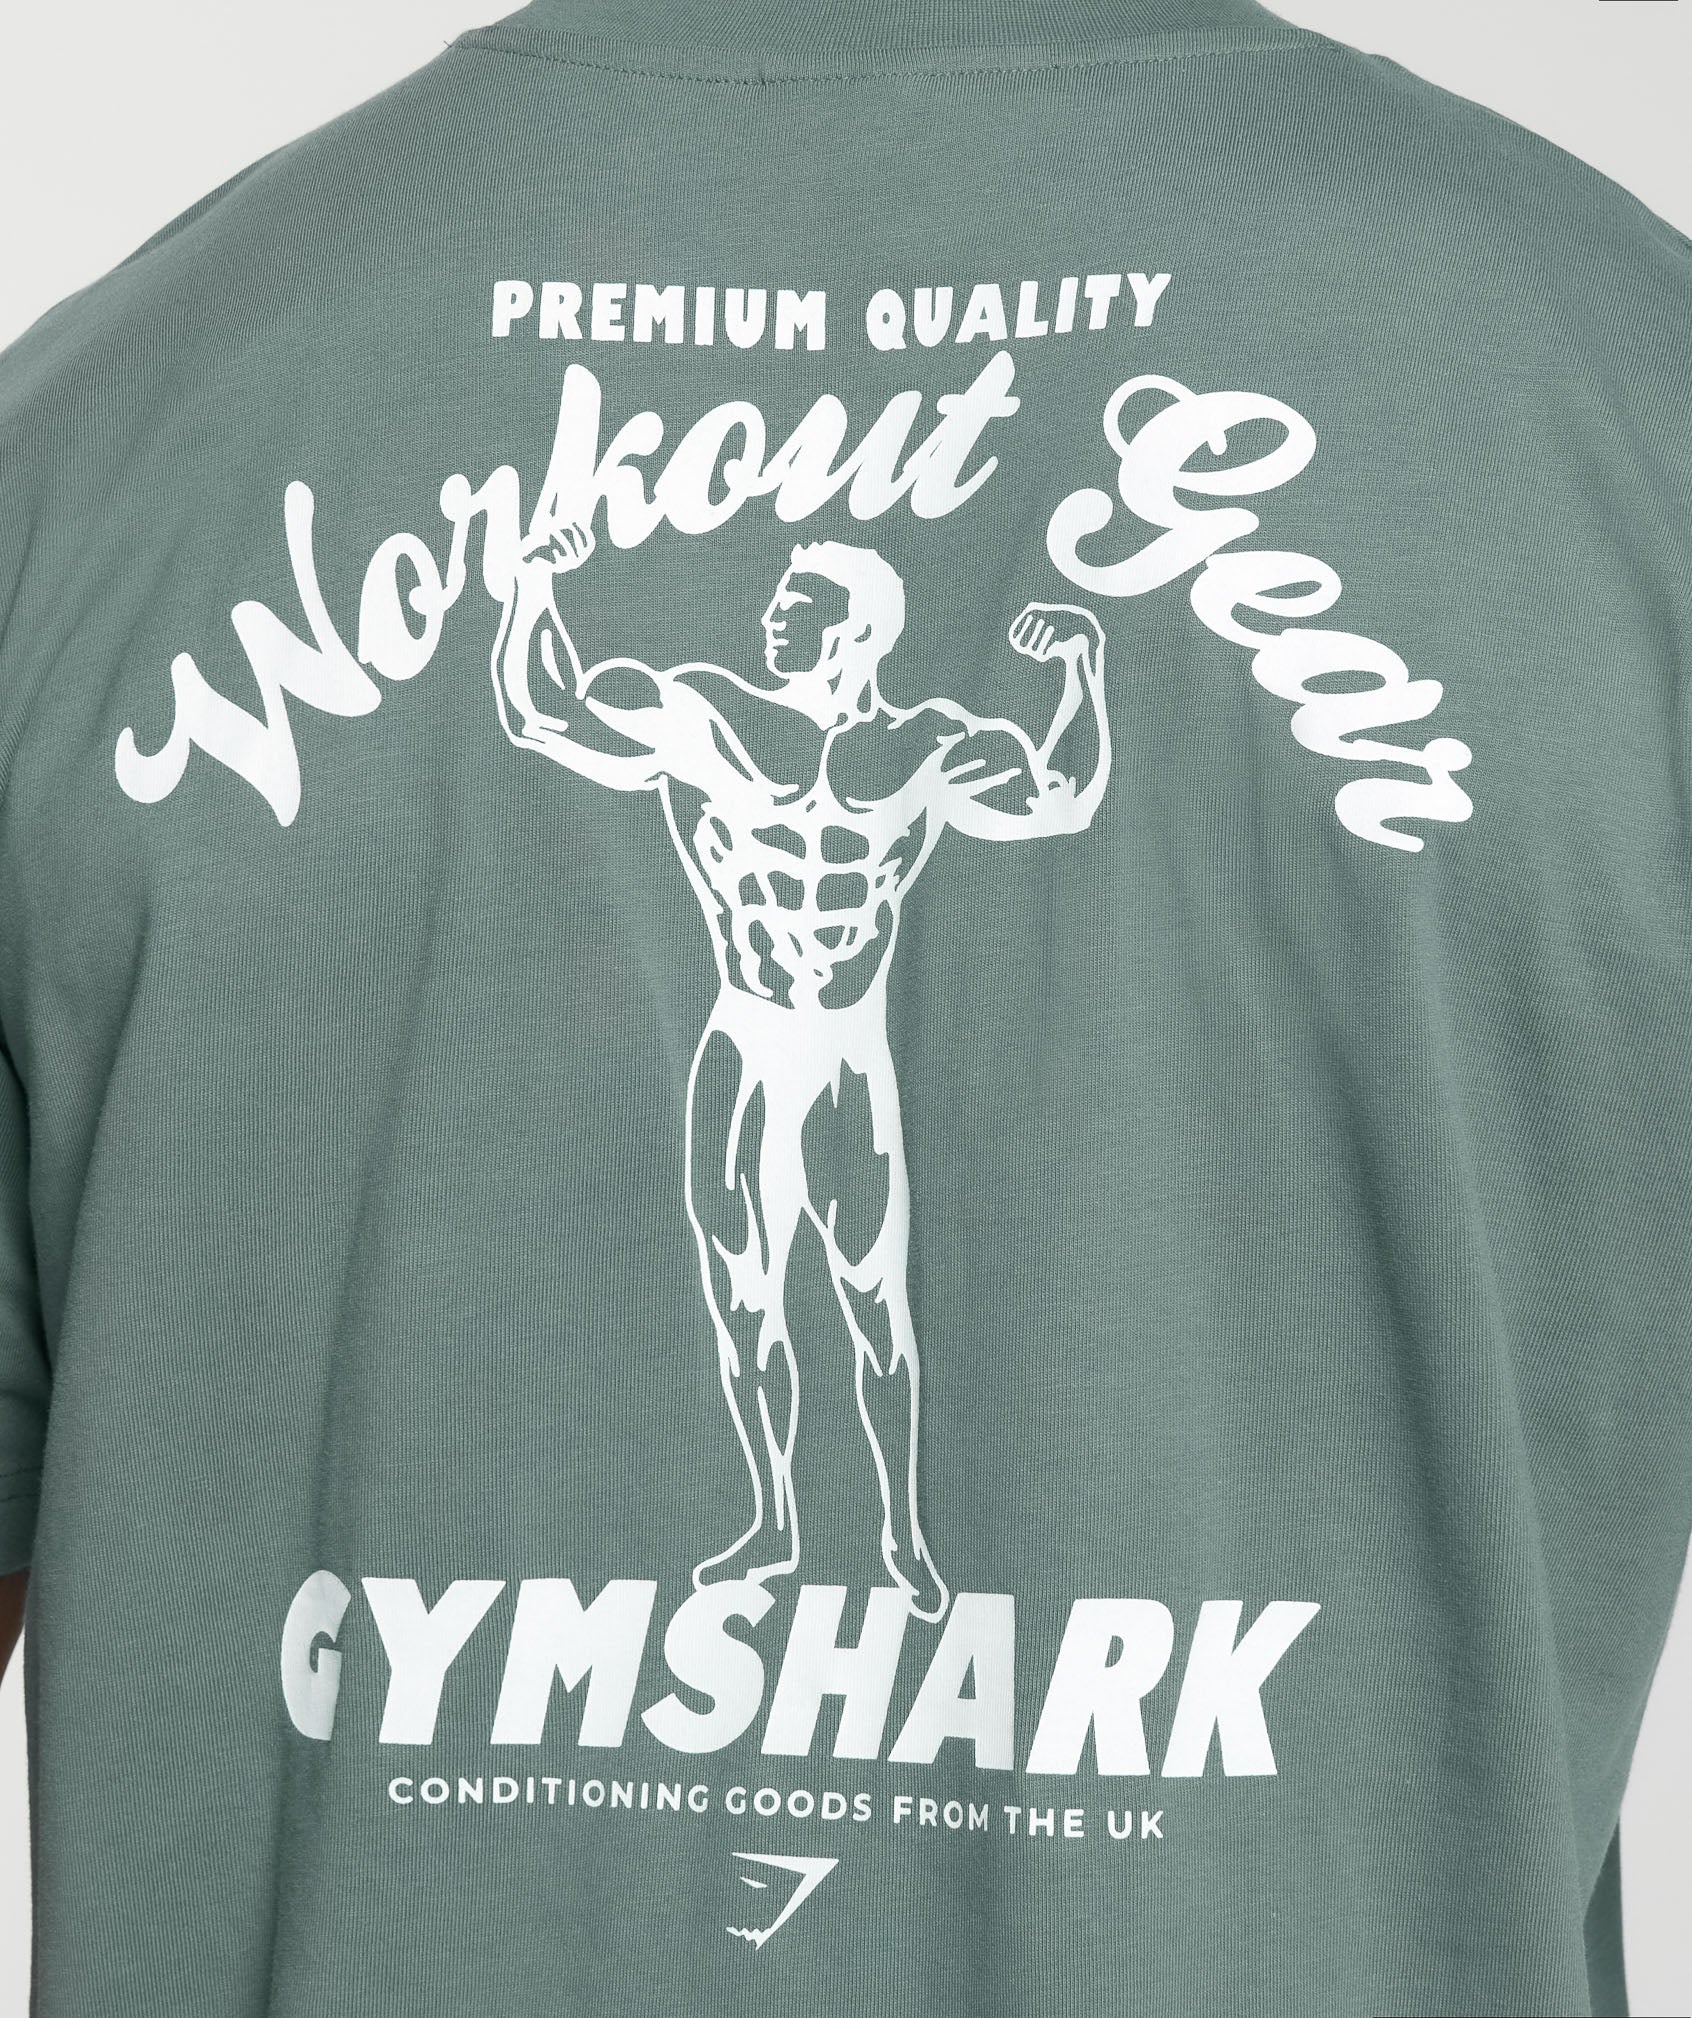 Workout Gear T-Shirt in Cargo Teal - view 6